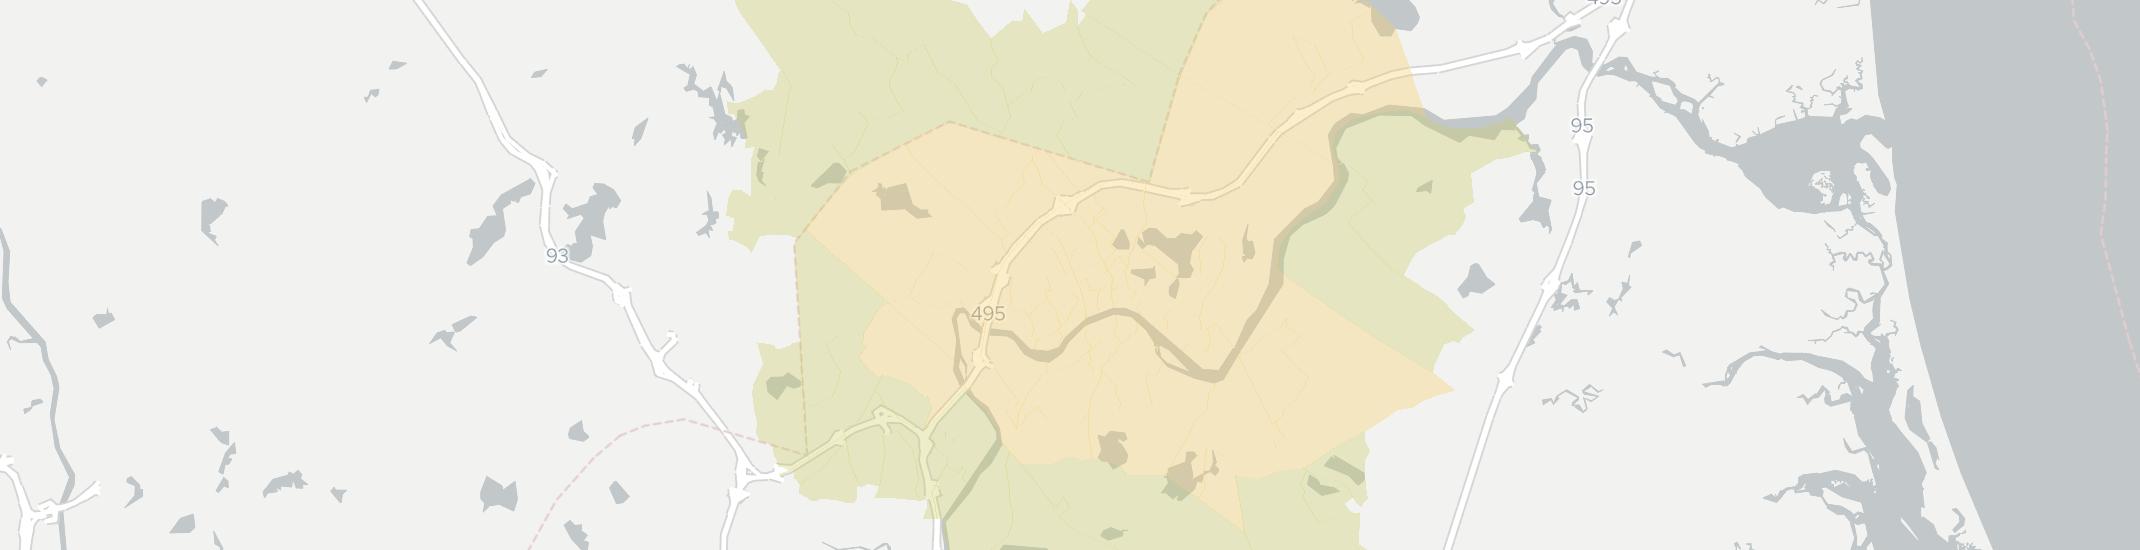 Haverhill Internet Competition Map. Click for interactive map